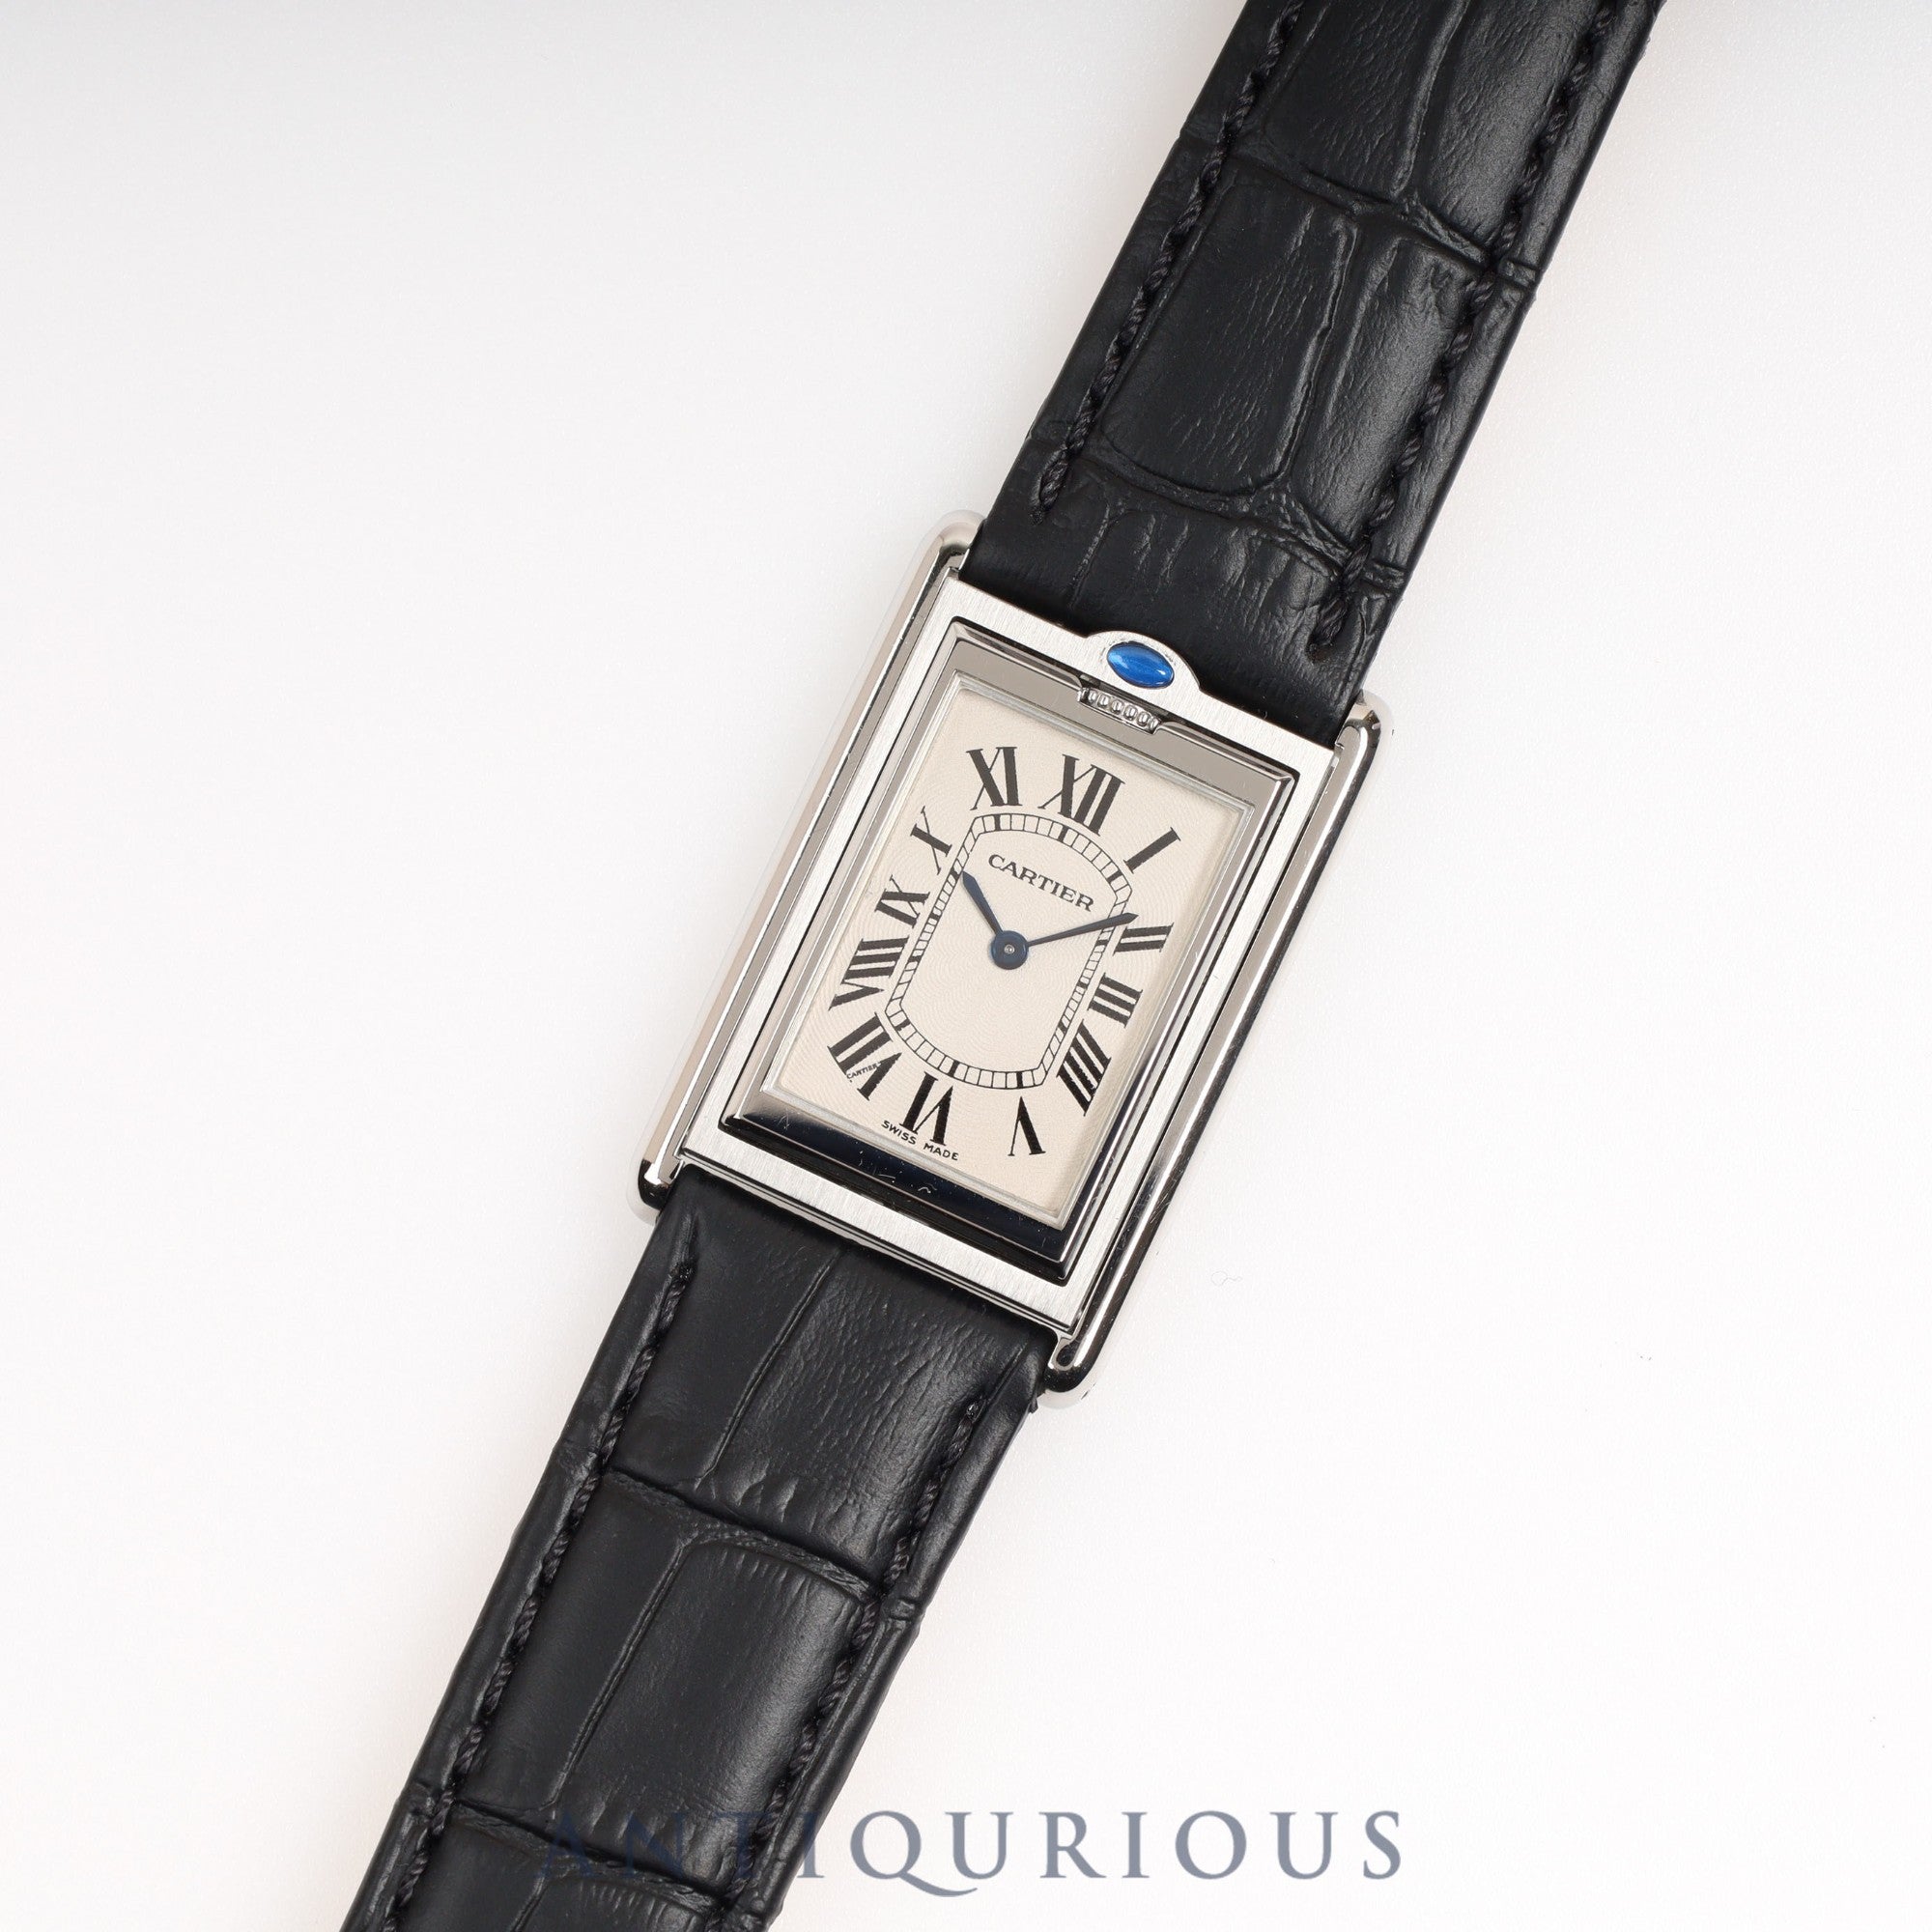 CARTIER TANK BASCULANT LM Complete service completed